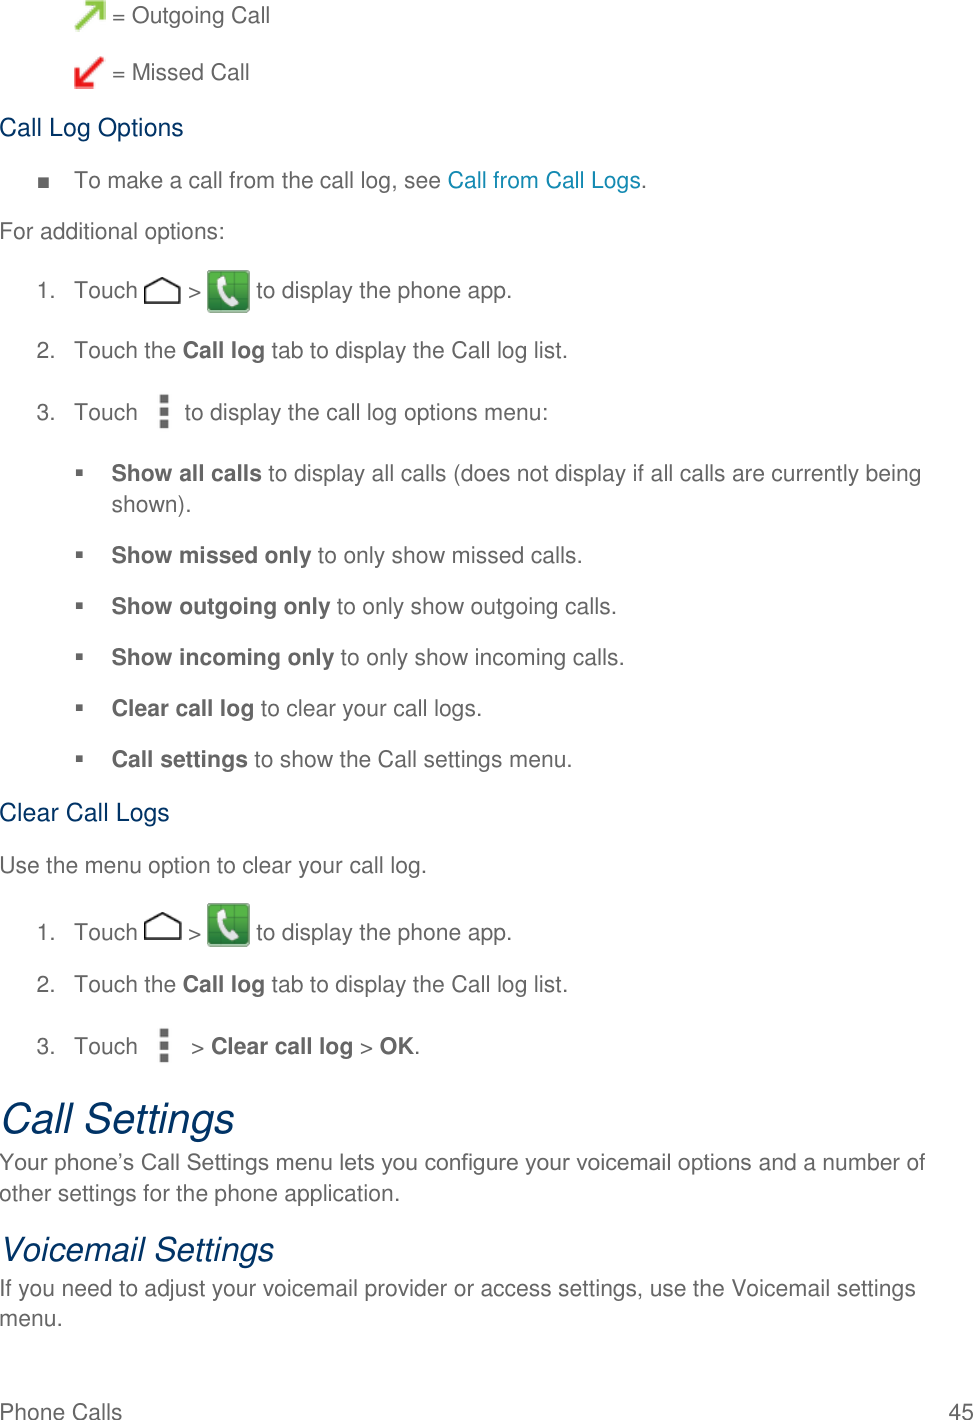 Phone Calls   45  = Outgoing Call  = Missed Call Call Log Options ■  To make a call from the call log, see Call from Call Logs. For additional options: 1.  Touch   &gt;   to display the phone app. 2.  Touch the Call log tab to display the Call log list. 3.  Touch  to display the call log options menu:  Show all calls to display all calls (does not display if all calls are currently being shown).  Show missed only to only show missed calls.  Show outgoing only to only show outgoing calls.  Show incoming only to only show incoming calls.  Clear call log to clear your call logs.  Call settings to show the Call settings menu. Clear Call Logs Use the menu option to clear your call log. 1.  Touch   &gt;   to display the phone app. 2.  Touch the Call log tab to display the Call log list. 3.  Touch   &gt; Clear call log &gt; OK. Call Settings Your phone’s Call Settings menu lets you configure your voicemail options and a number of other settings for the phone application. Voicemail Settings If you need to adjust your voicemail provider or access settings, use the Voicemail settings menu. 